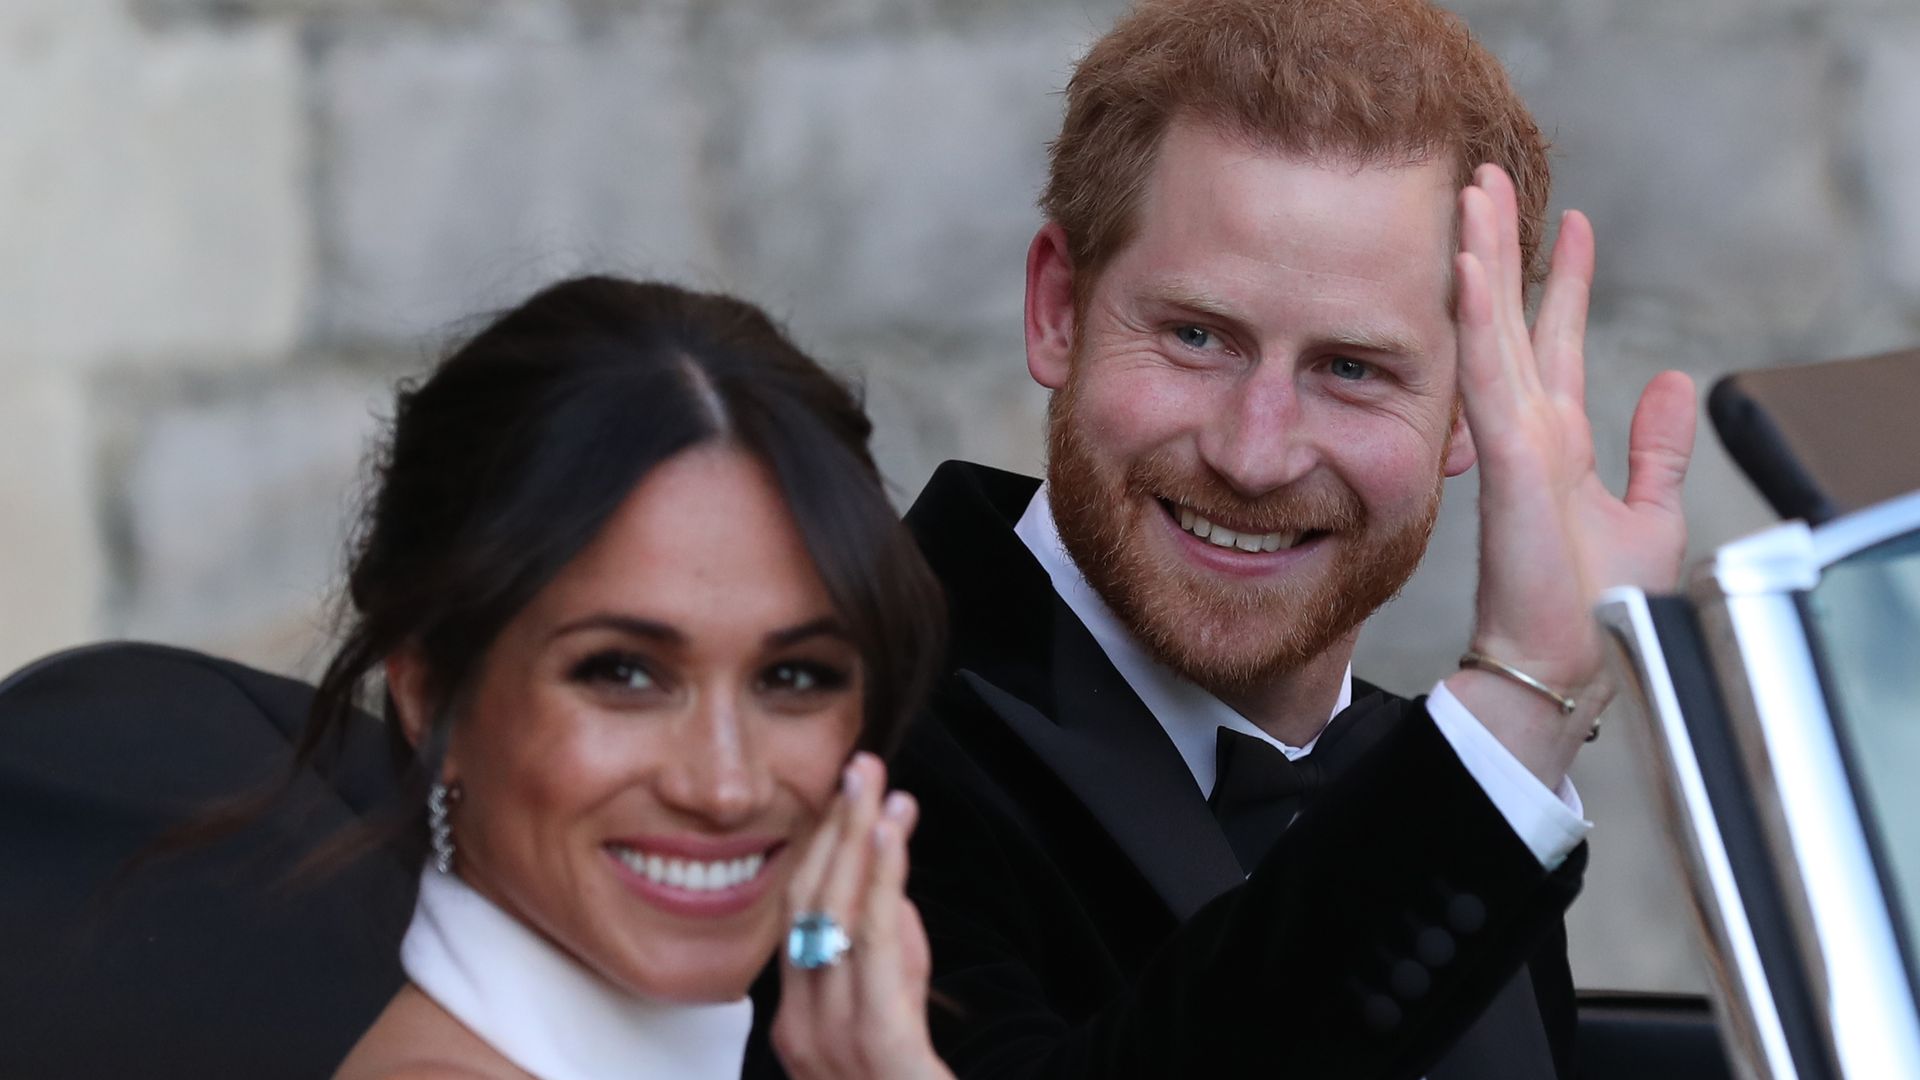 Meghan Markle and Prince Harry waving to crowds as they headed to their wedding reception